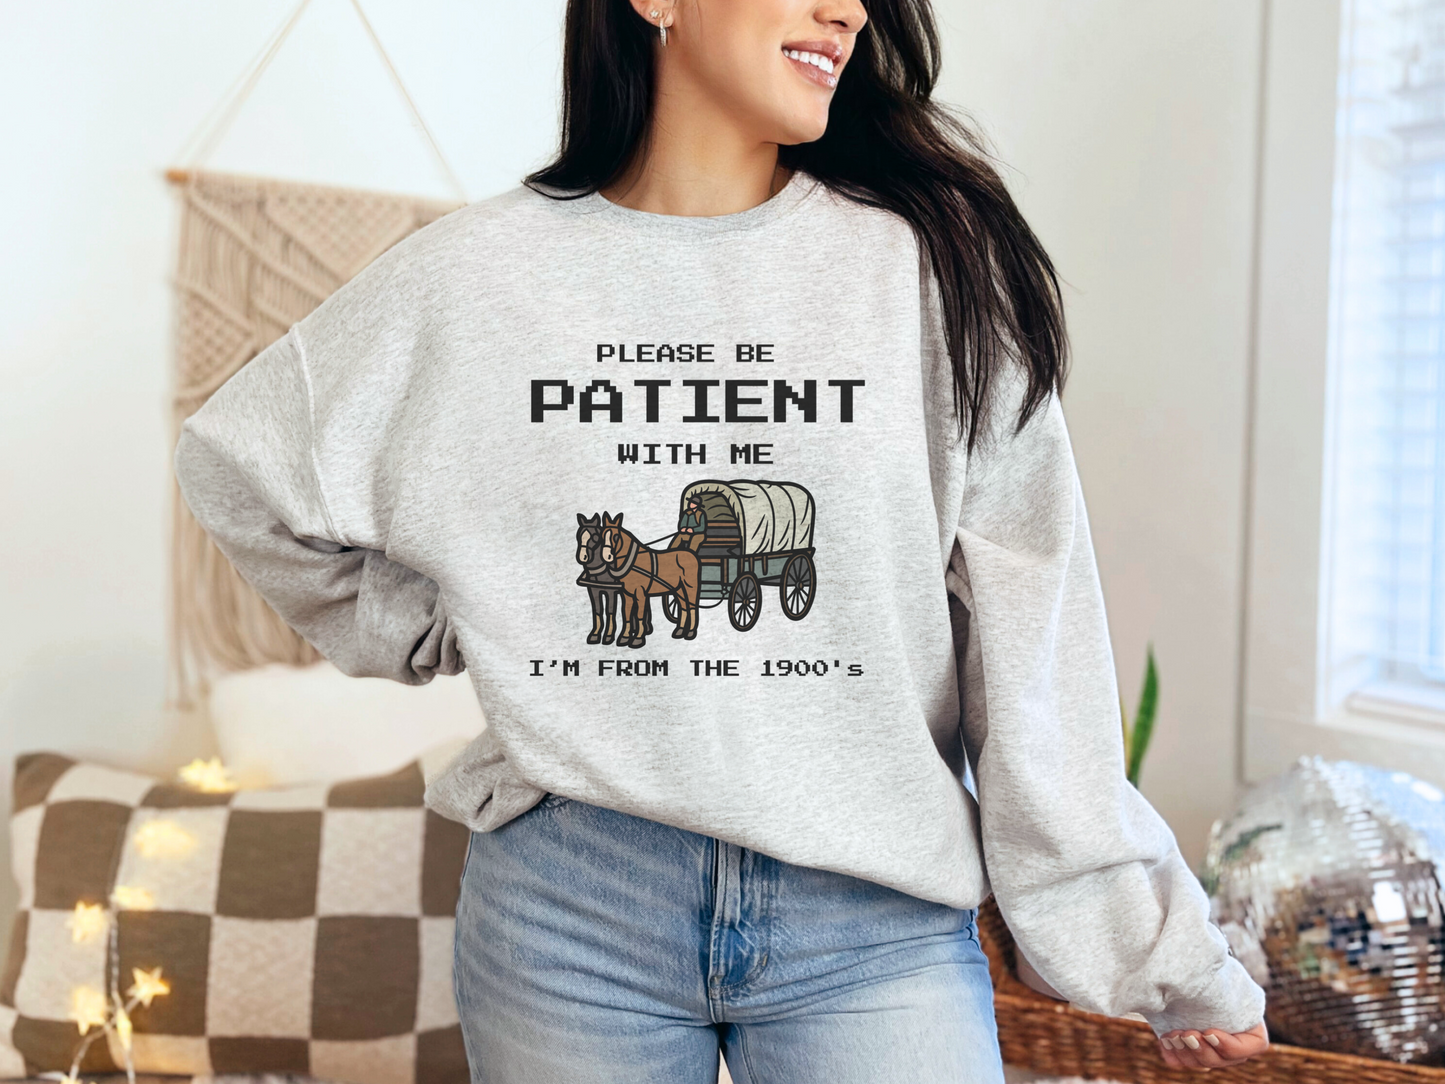 Please Be Patient With Me Graphic T-Shirt or Sweatshirt